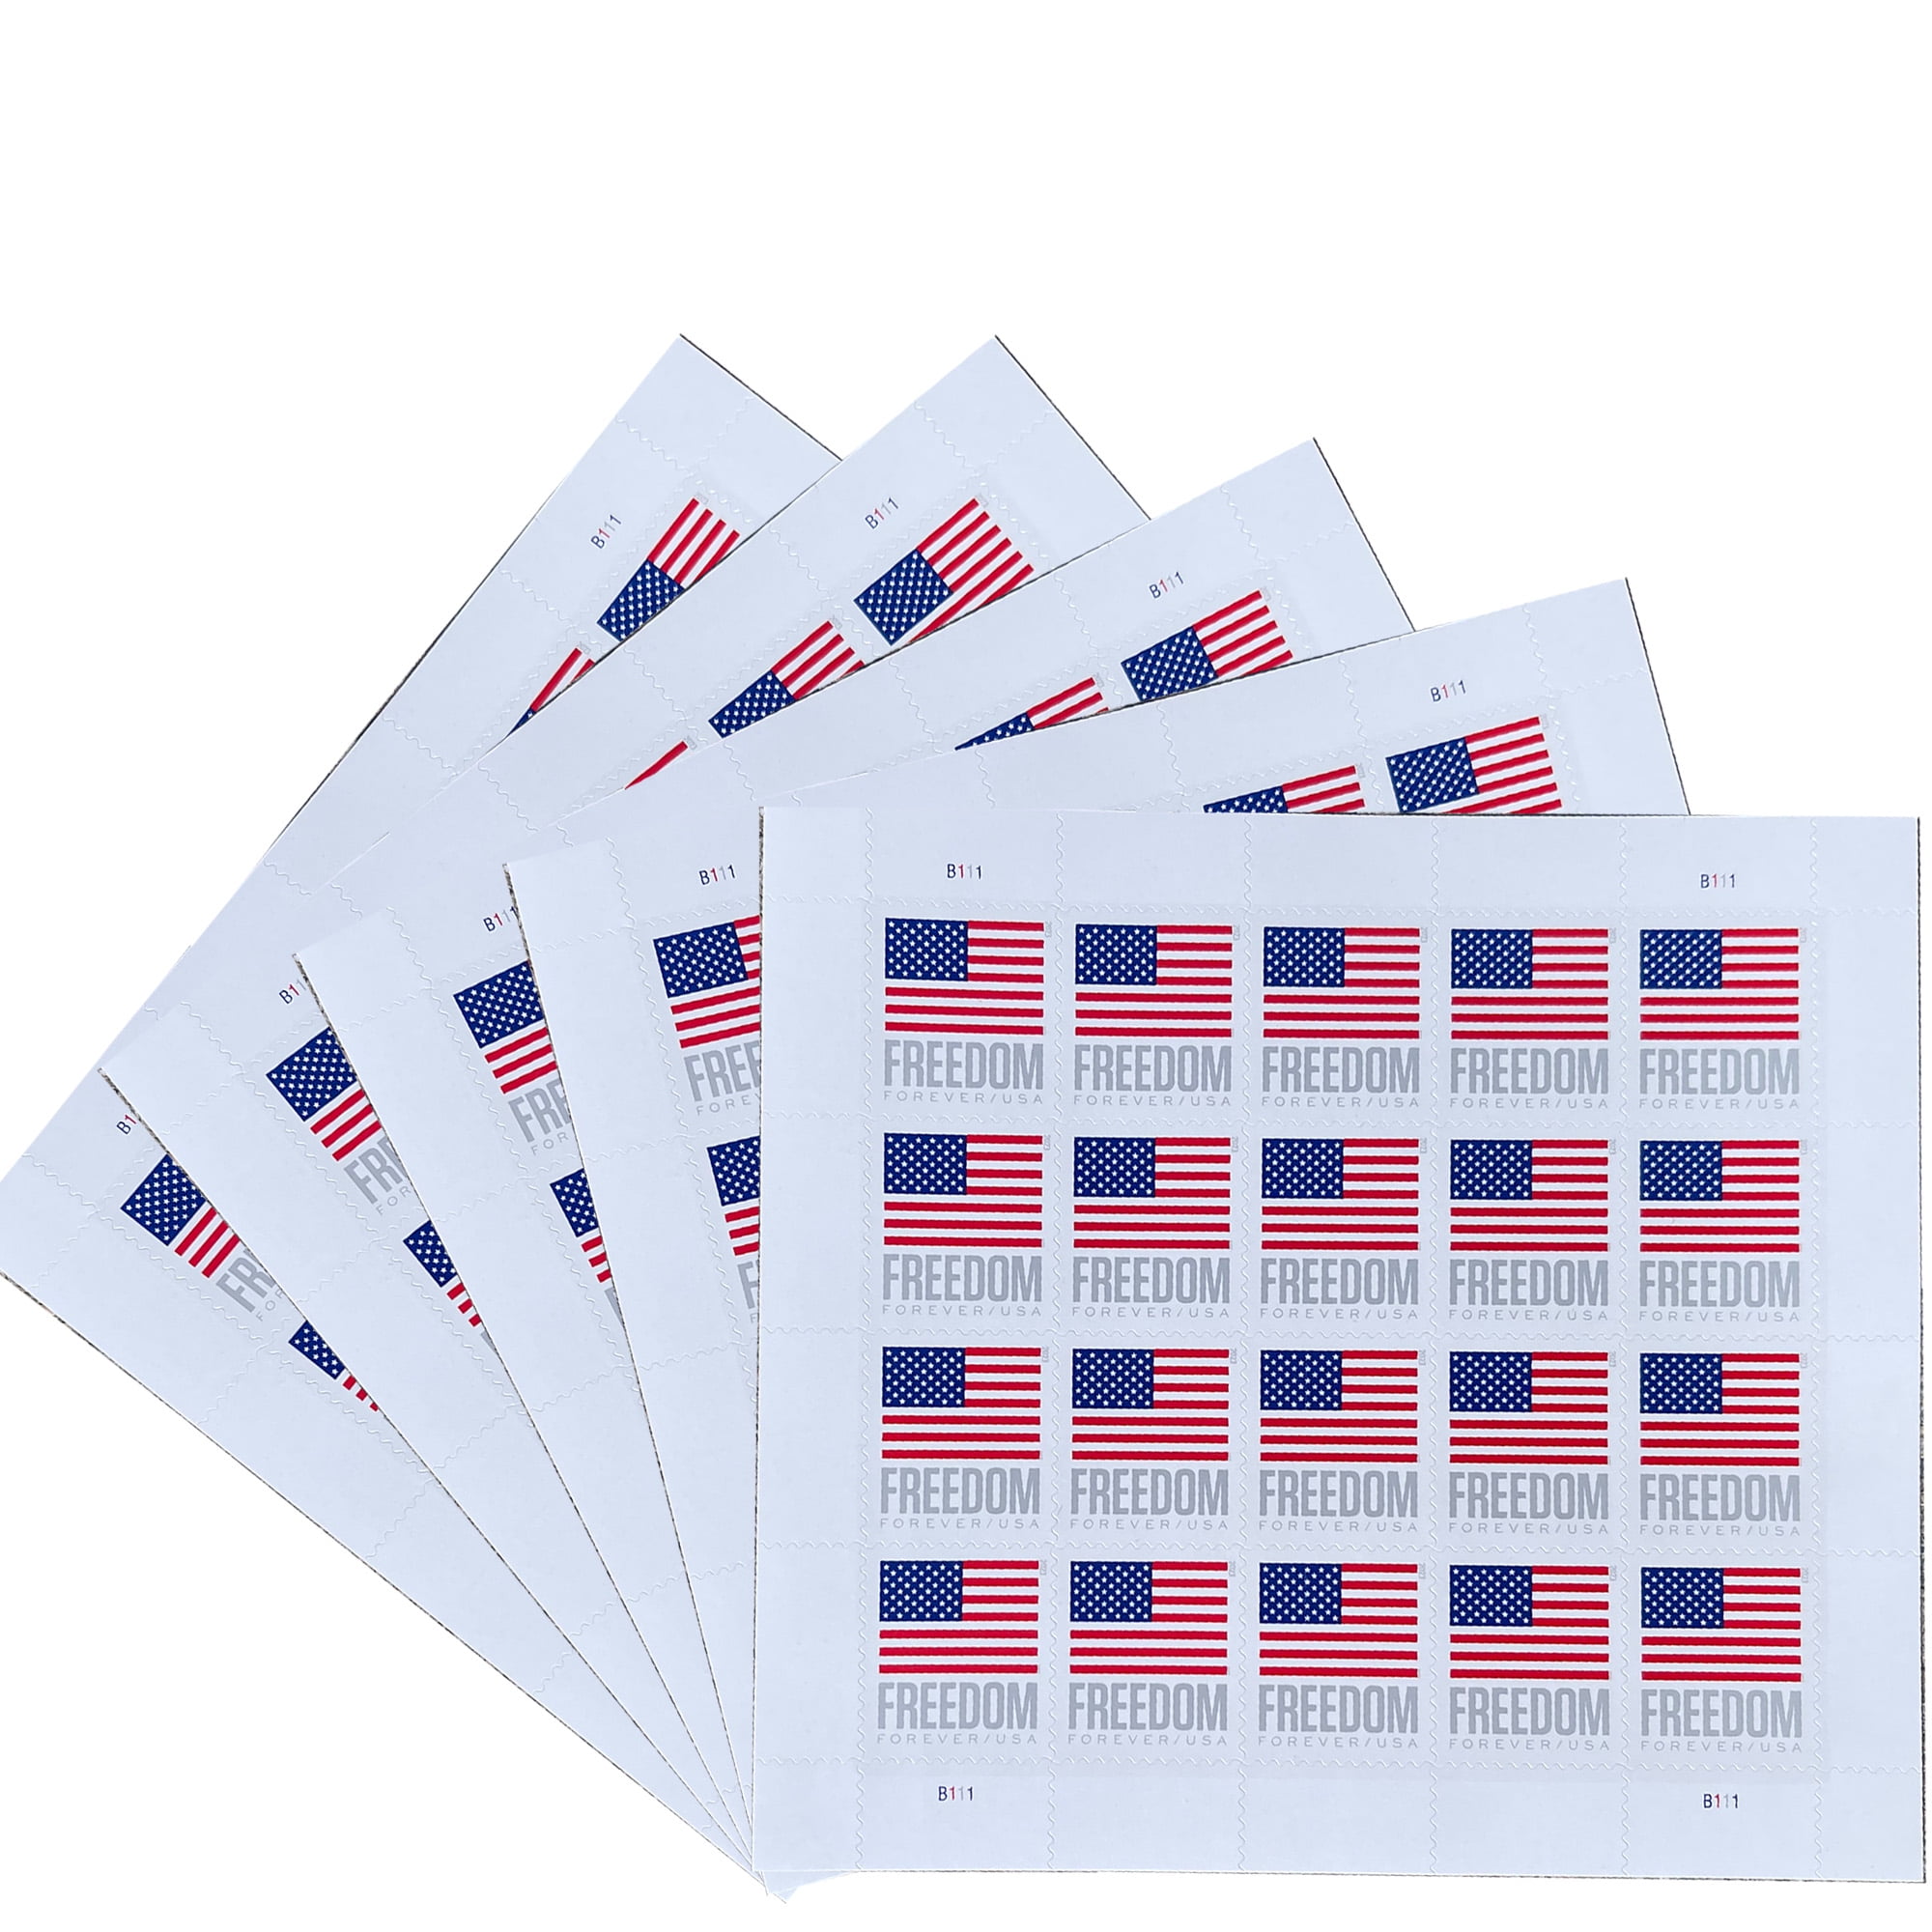 USPS U.S Flag 2022 Book of 20 Forever Stamps - DroneUp Delivery